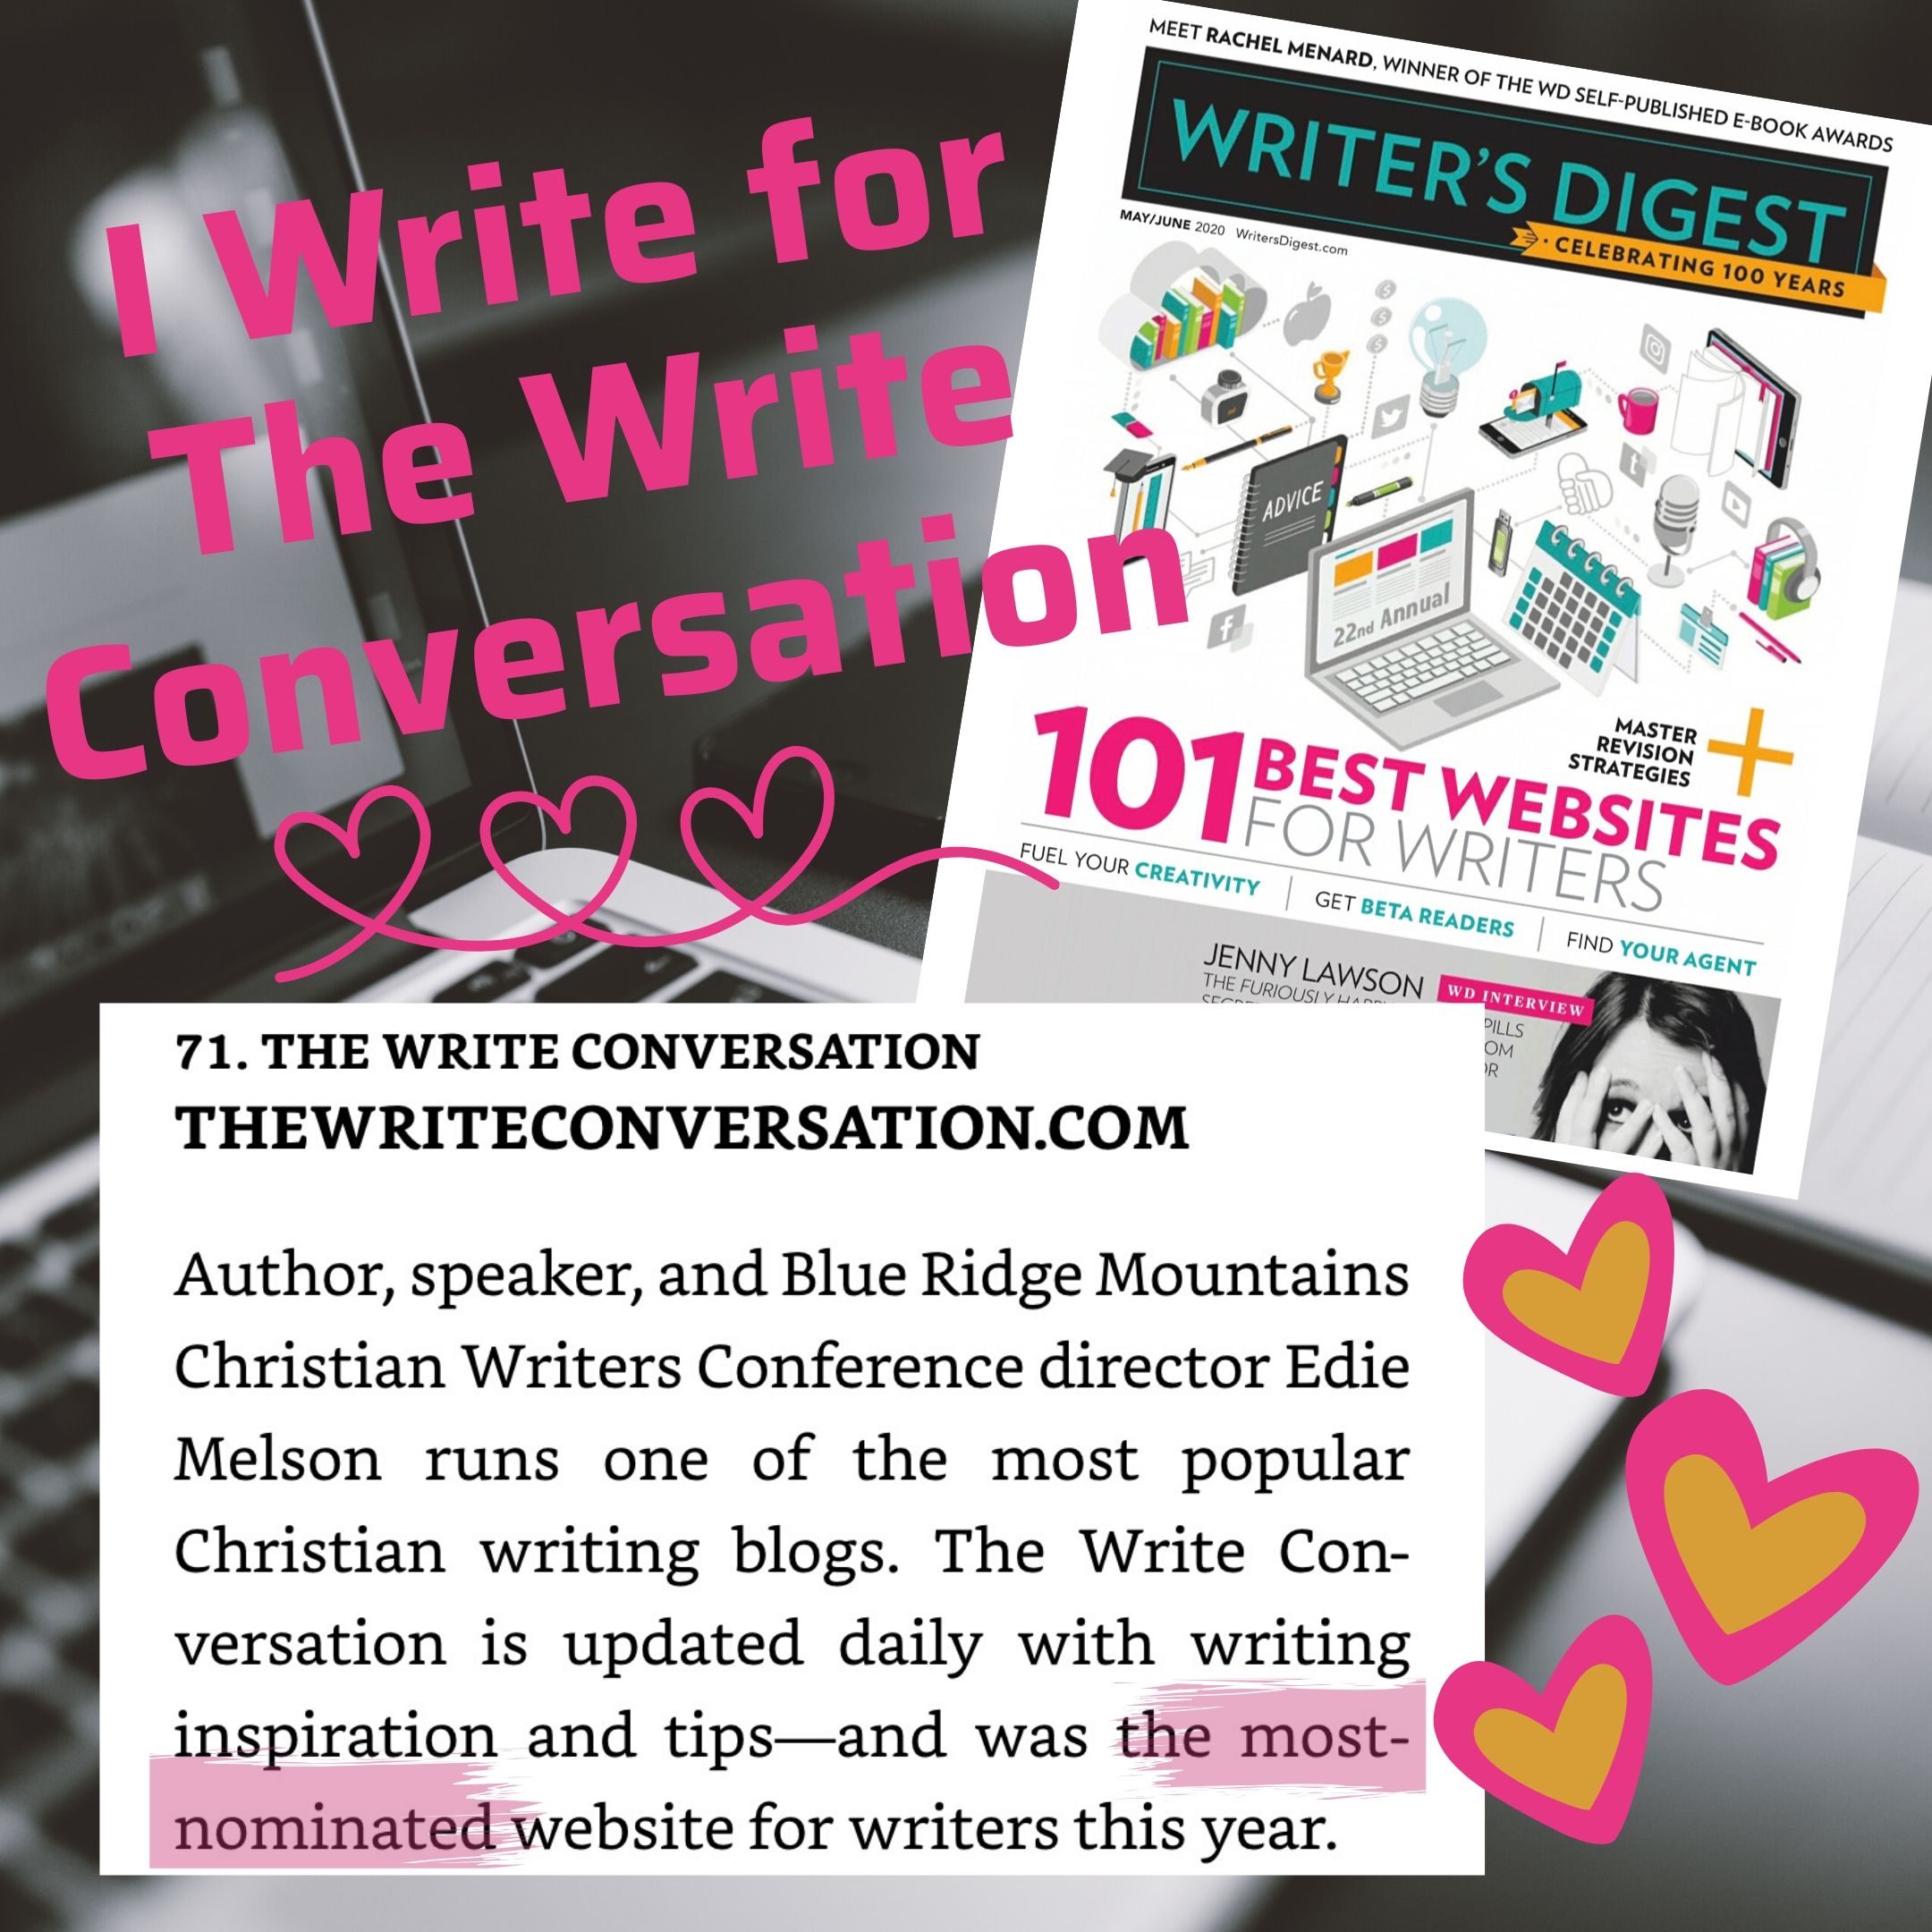 The Write Conversation Part of the 1010 Best Websites for Writers